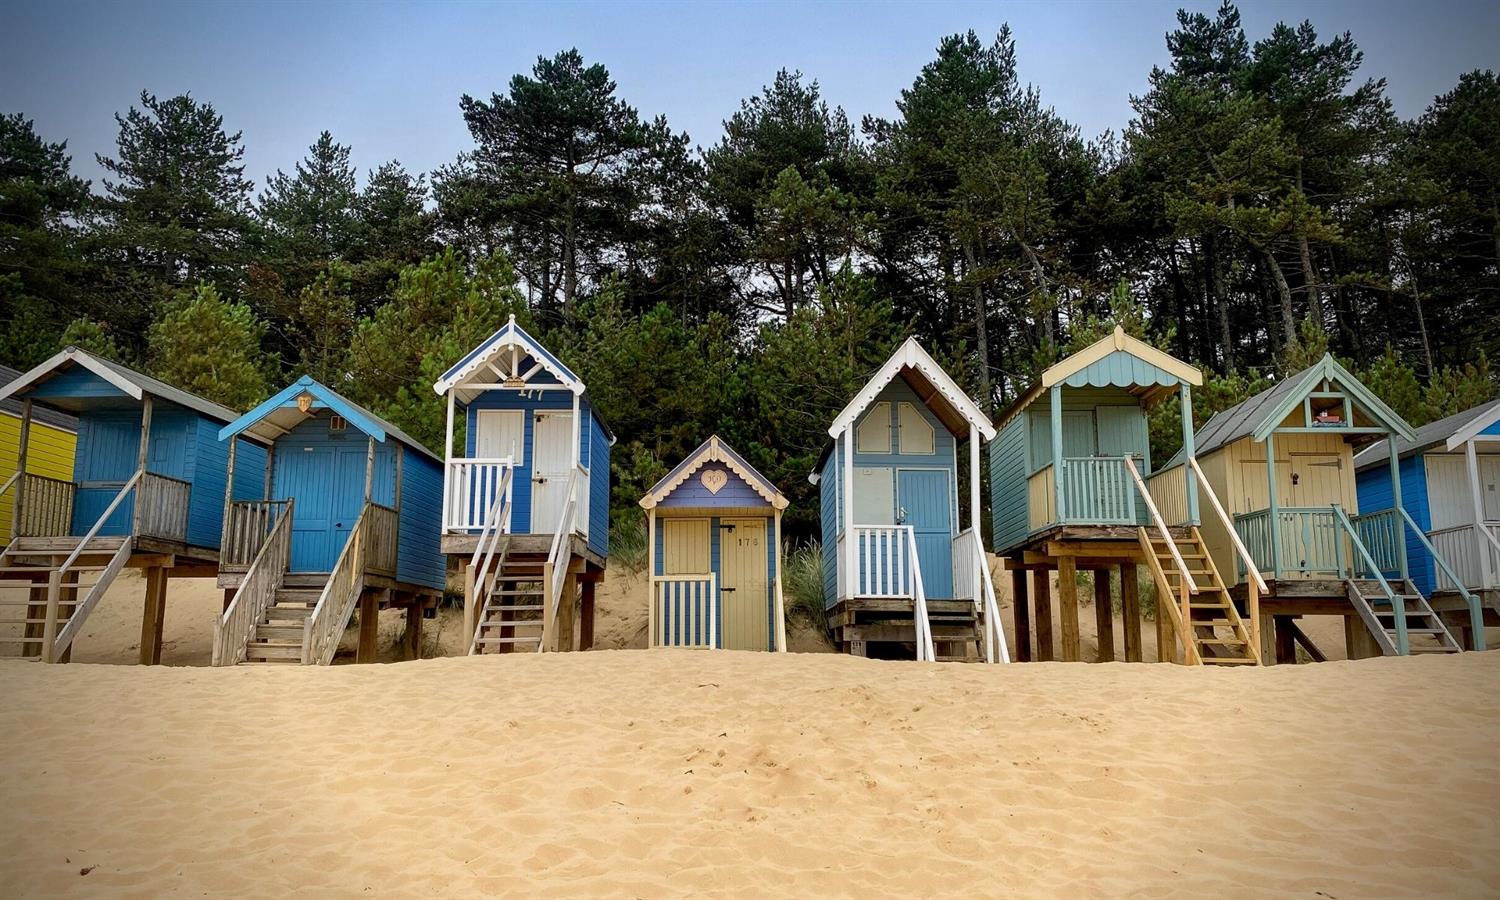 Beach huts at Wells-next-to-the-sea